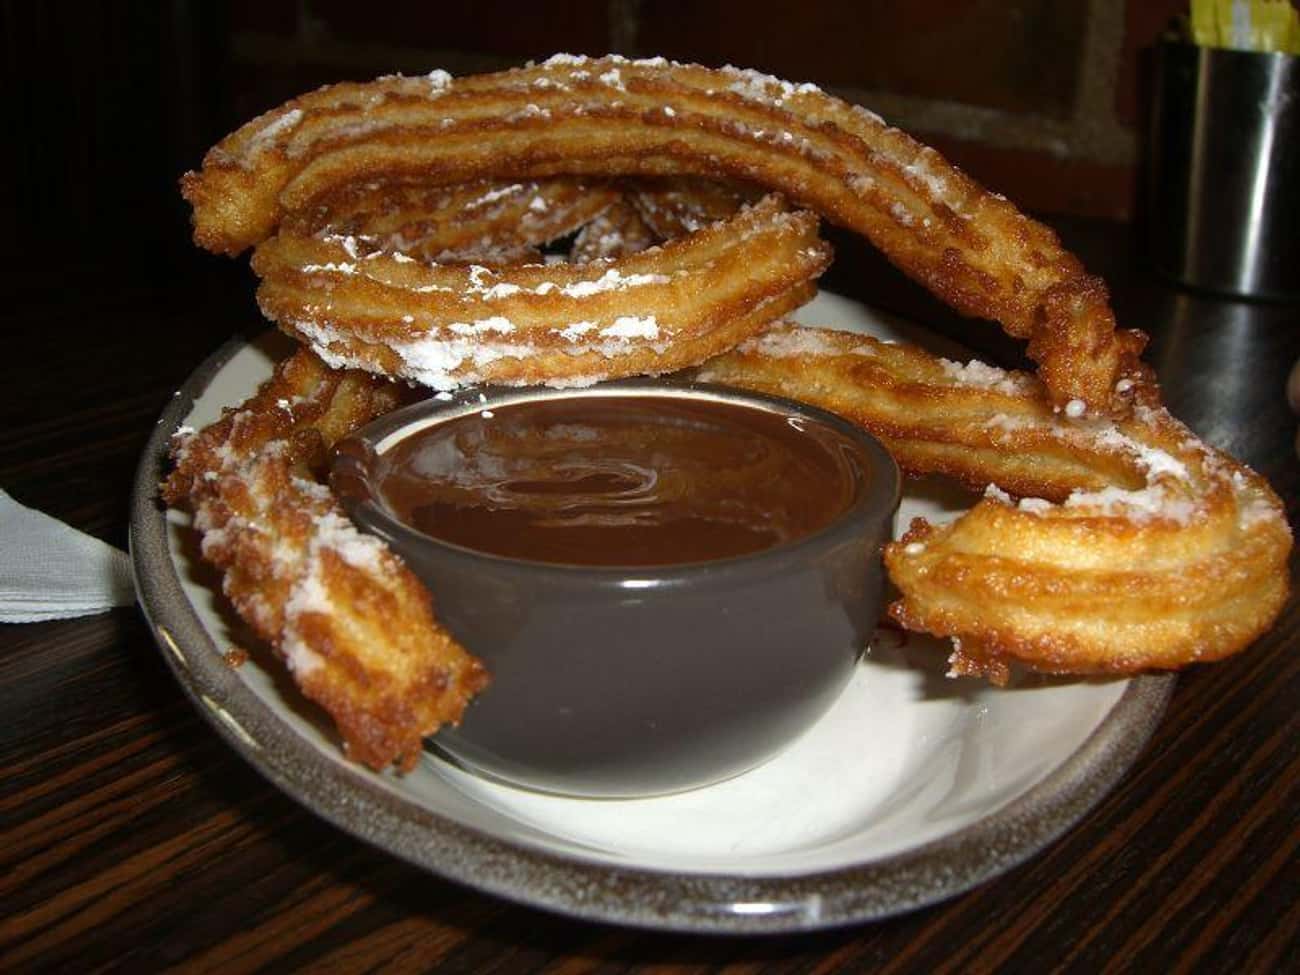 The Churro Was Introduced To Latin America During The Spanish Inquisition